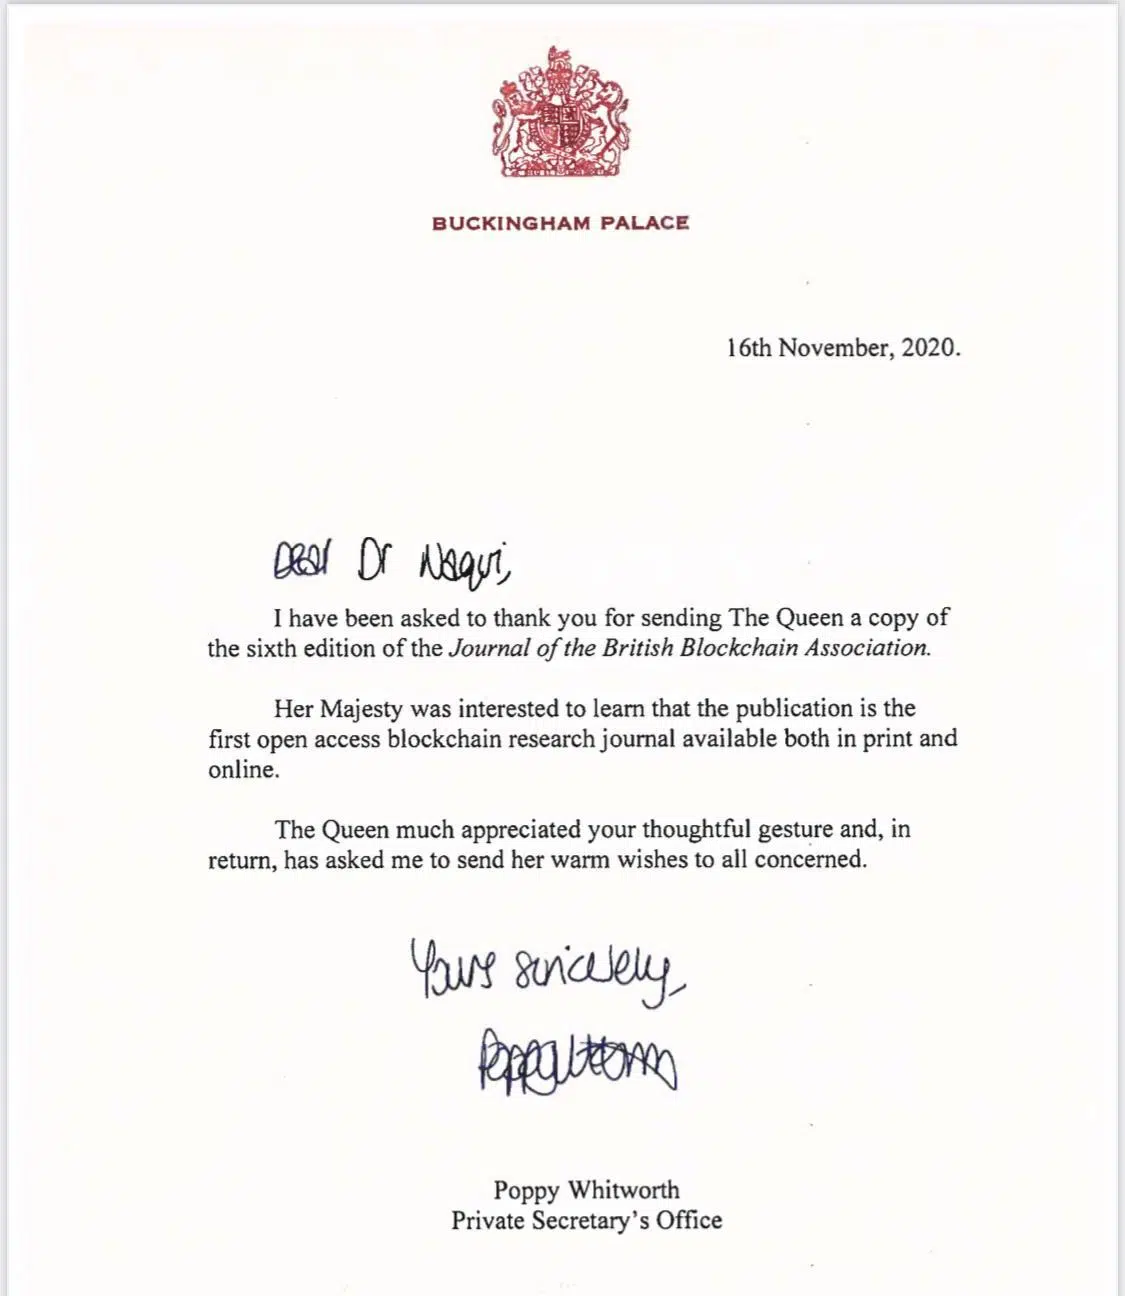 The Queen of England was pleased to receive material studying blockchain technology and sent a letter of thanks